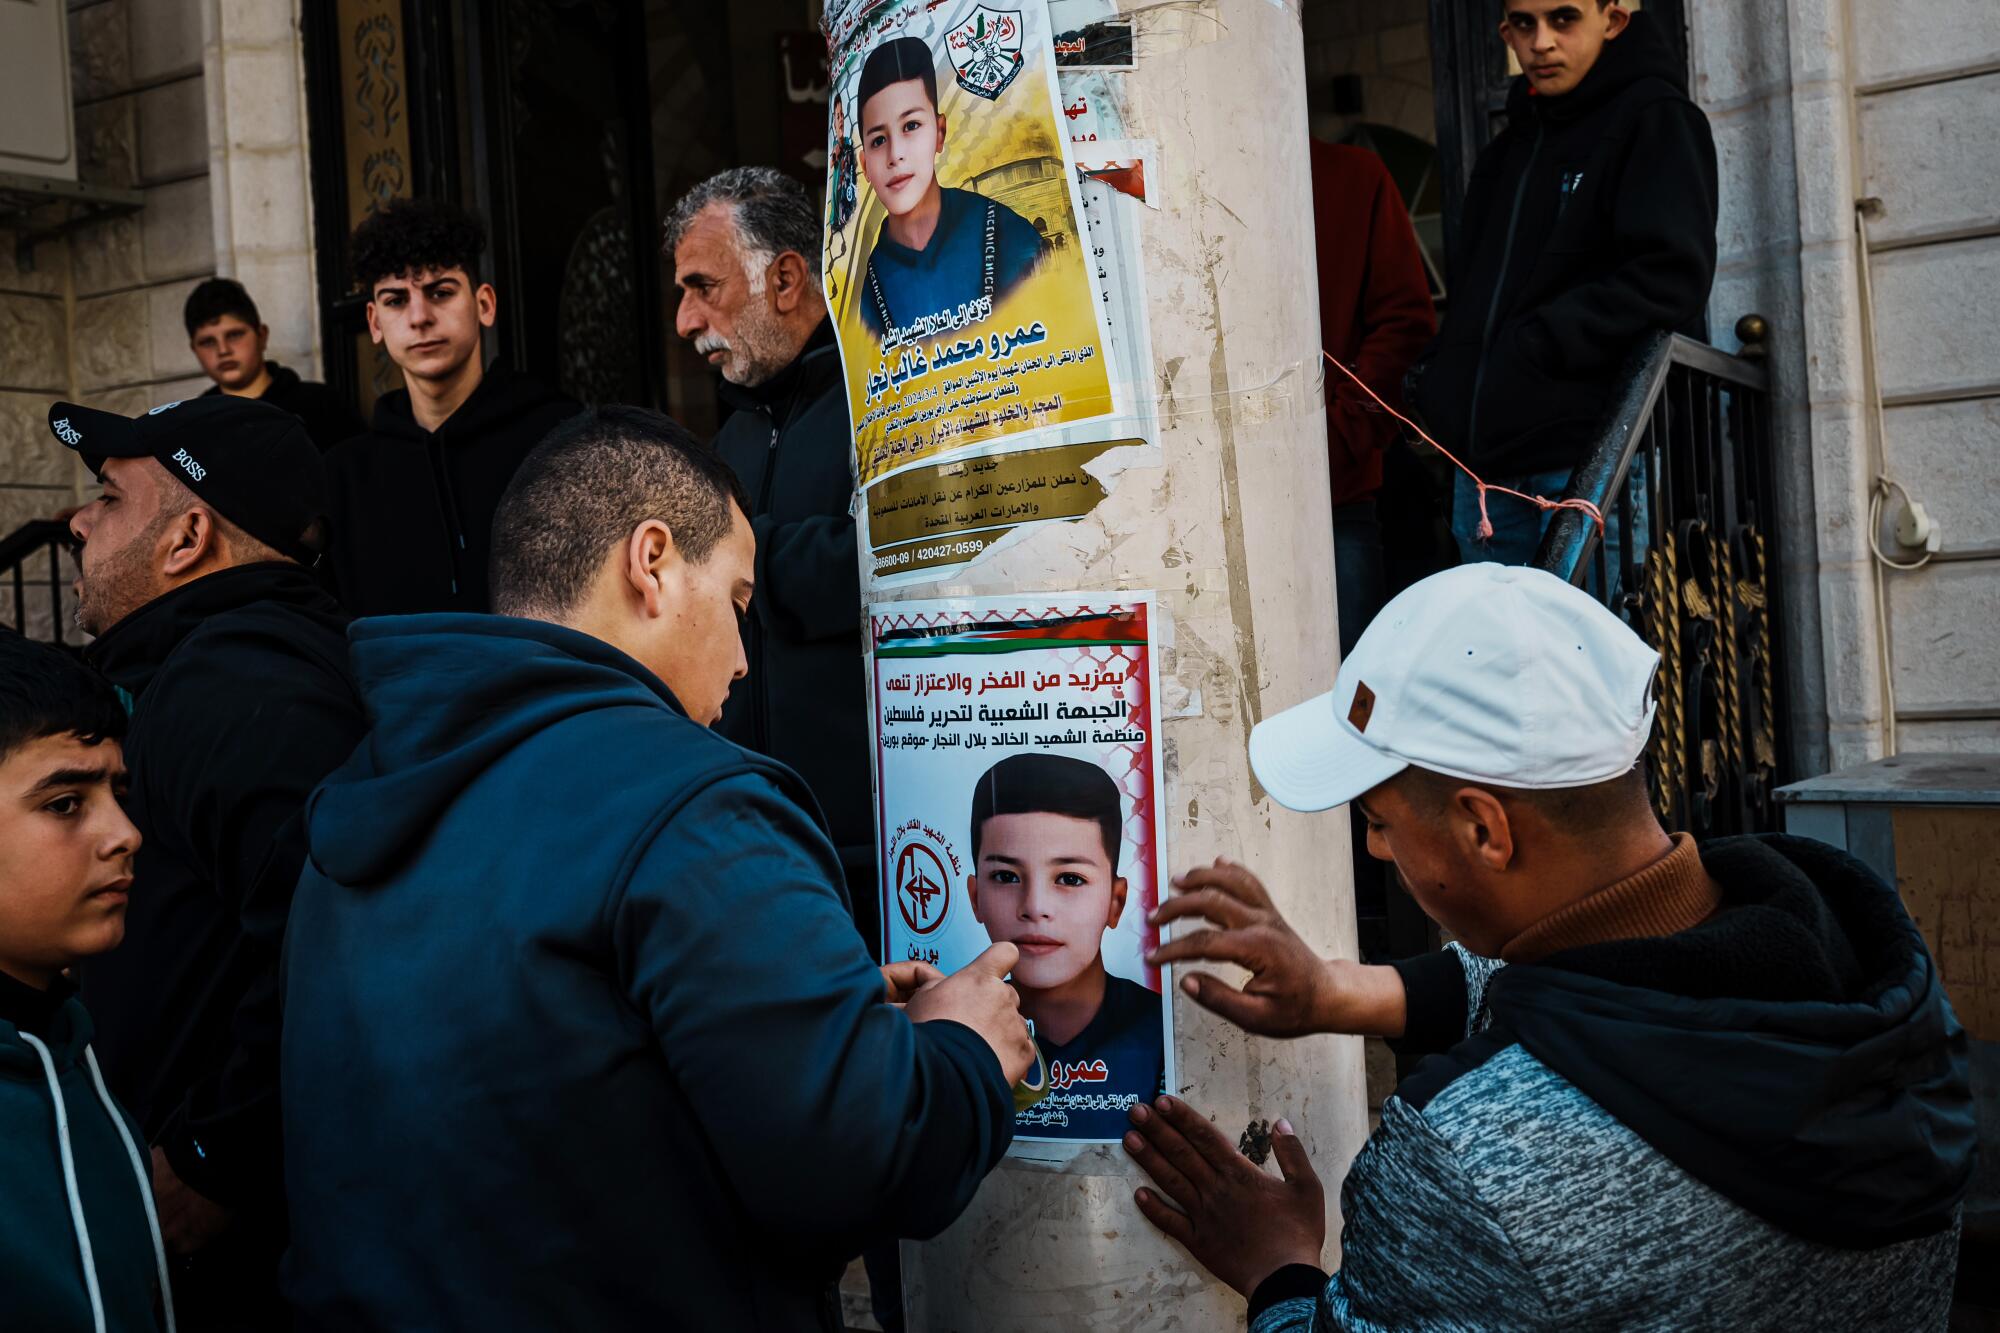 Community members help paste up martyr posters outside the mosque during a funeral procession.